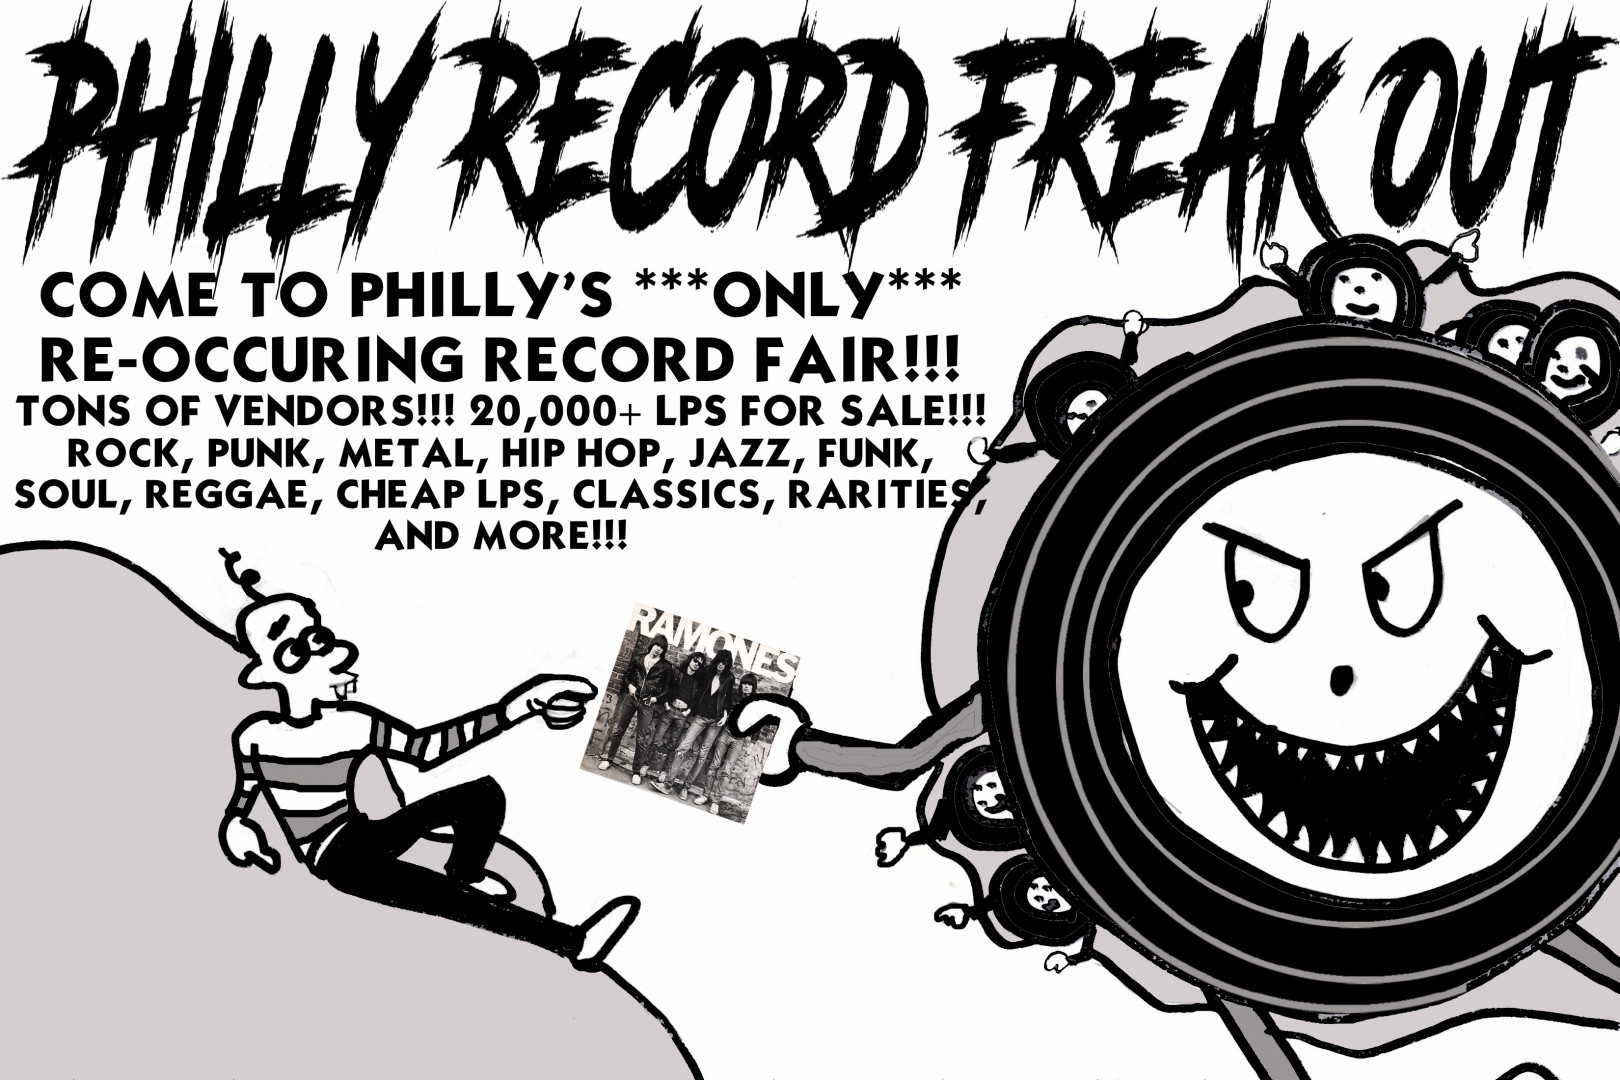 The Philly Record Freak Out is Tomorrow!